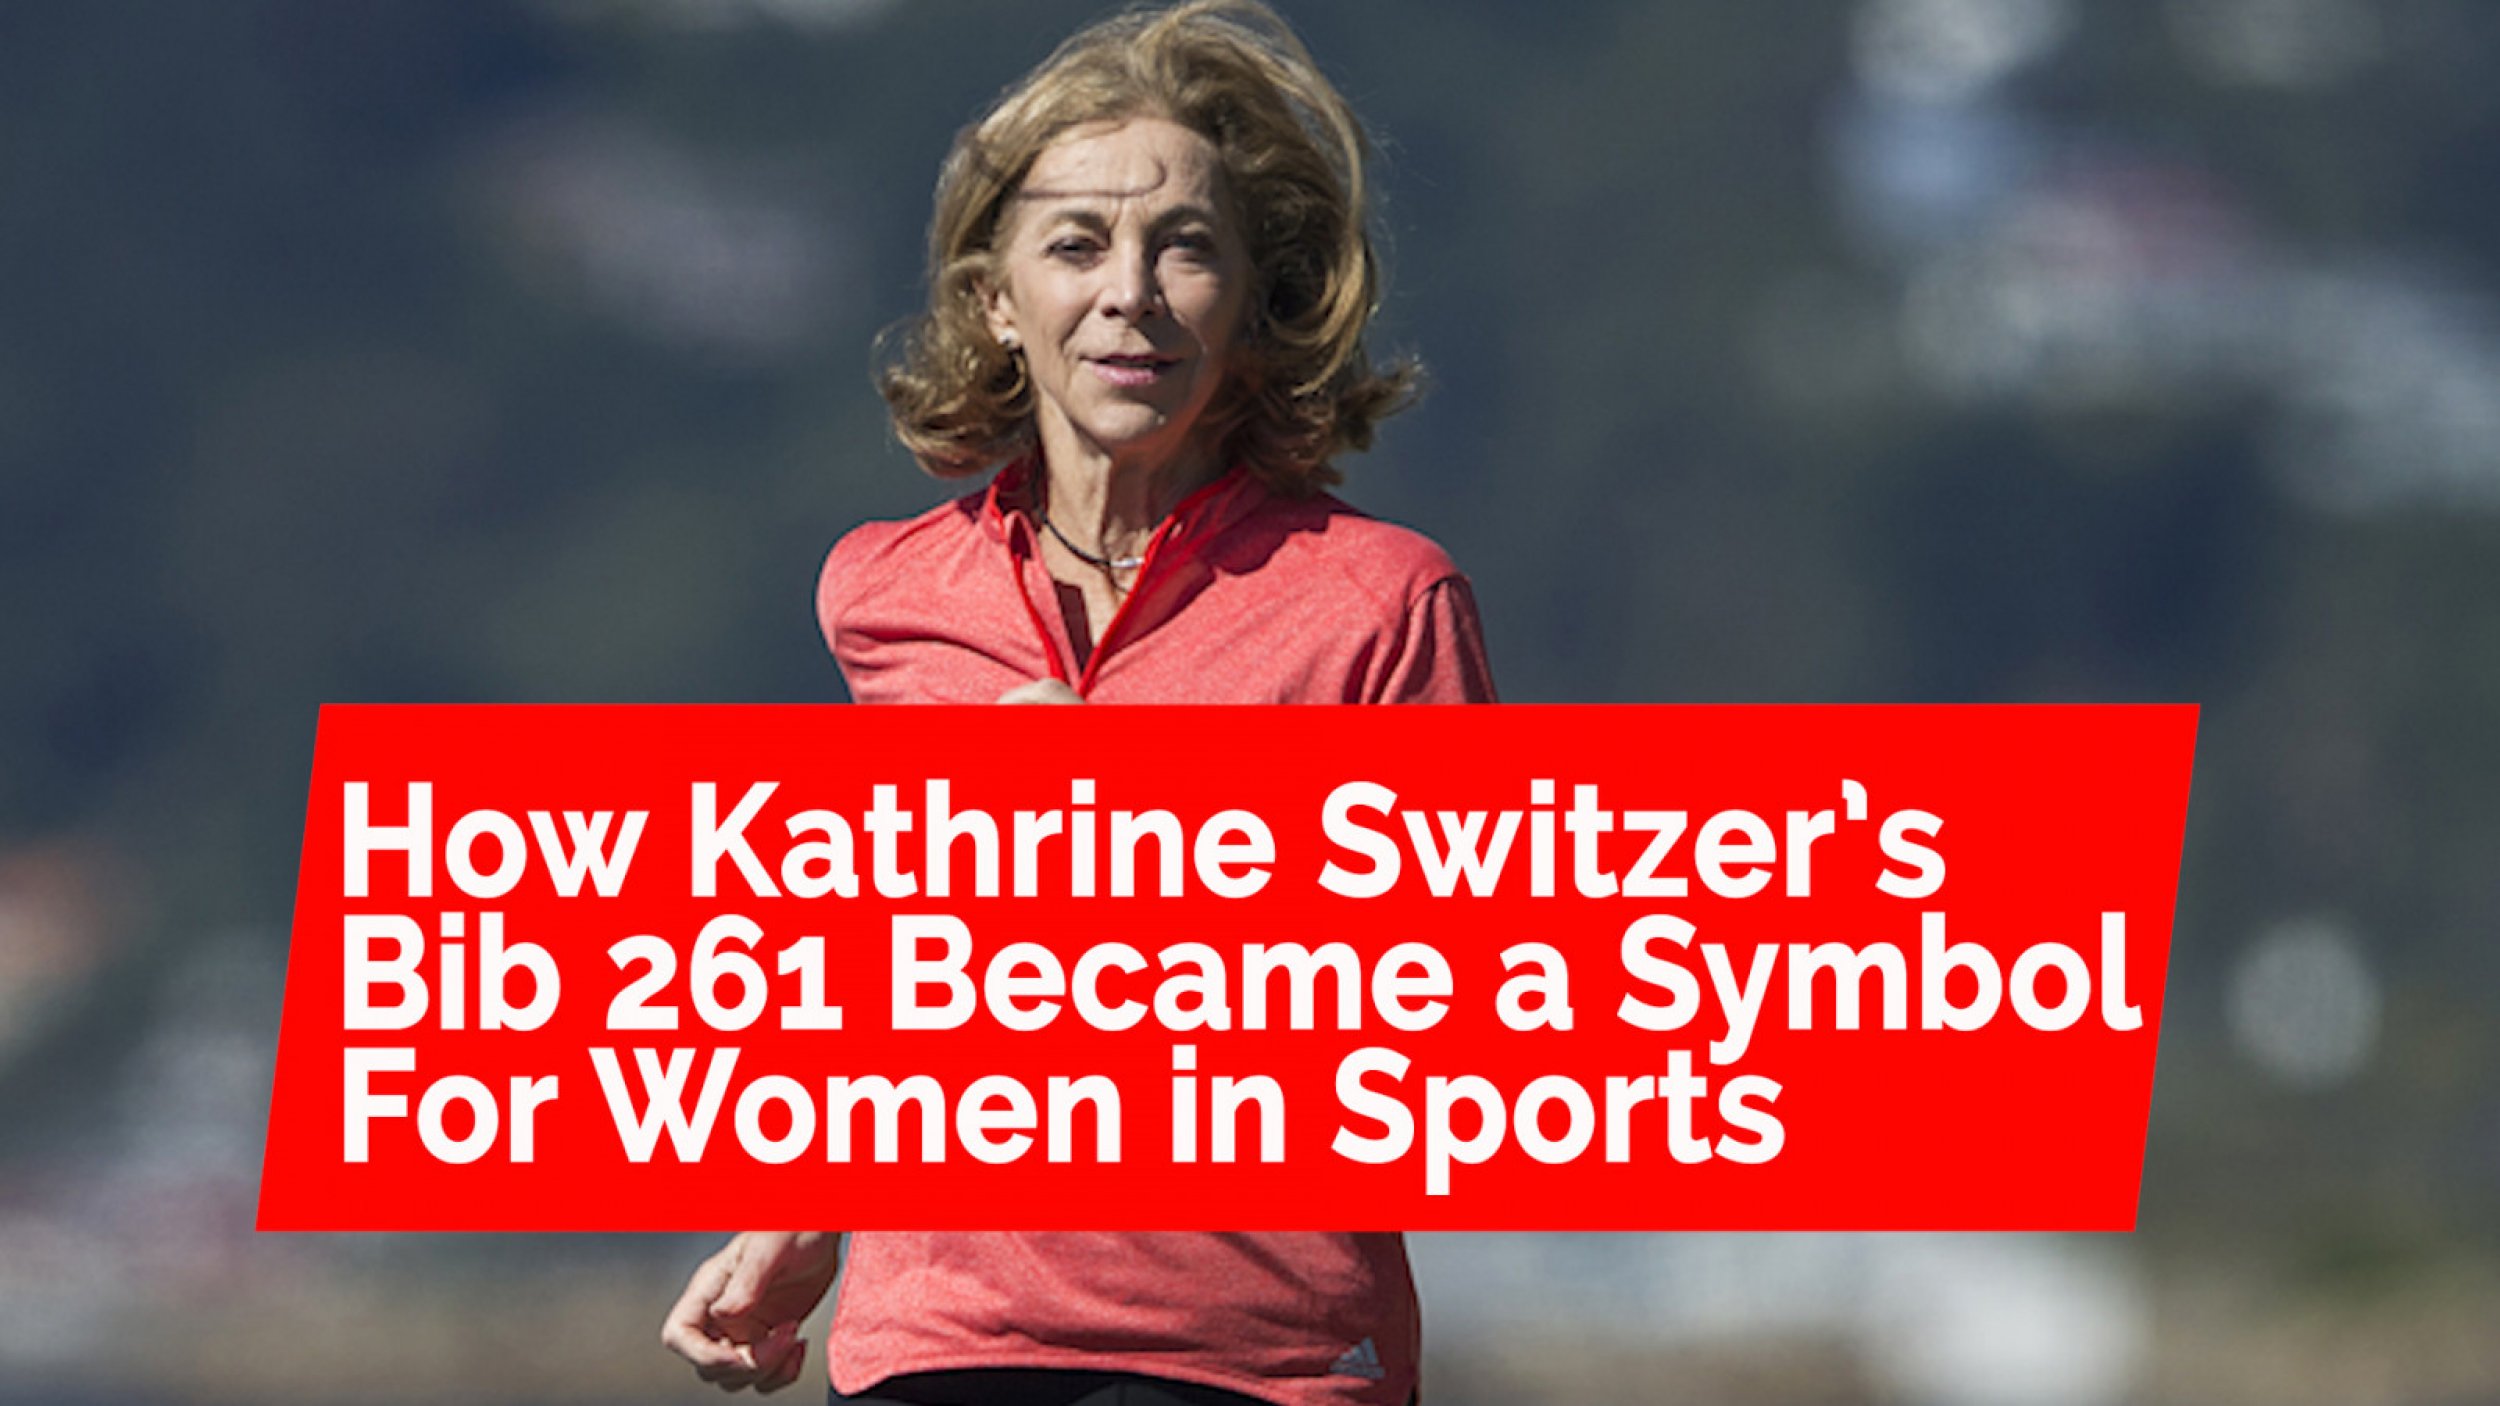 How Kathrine Switzers Bib 261 Became a Symbol For Women in Sports